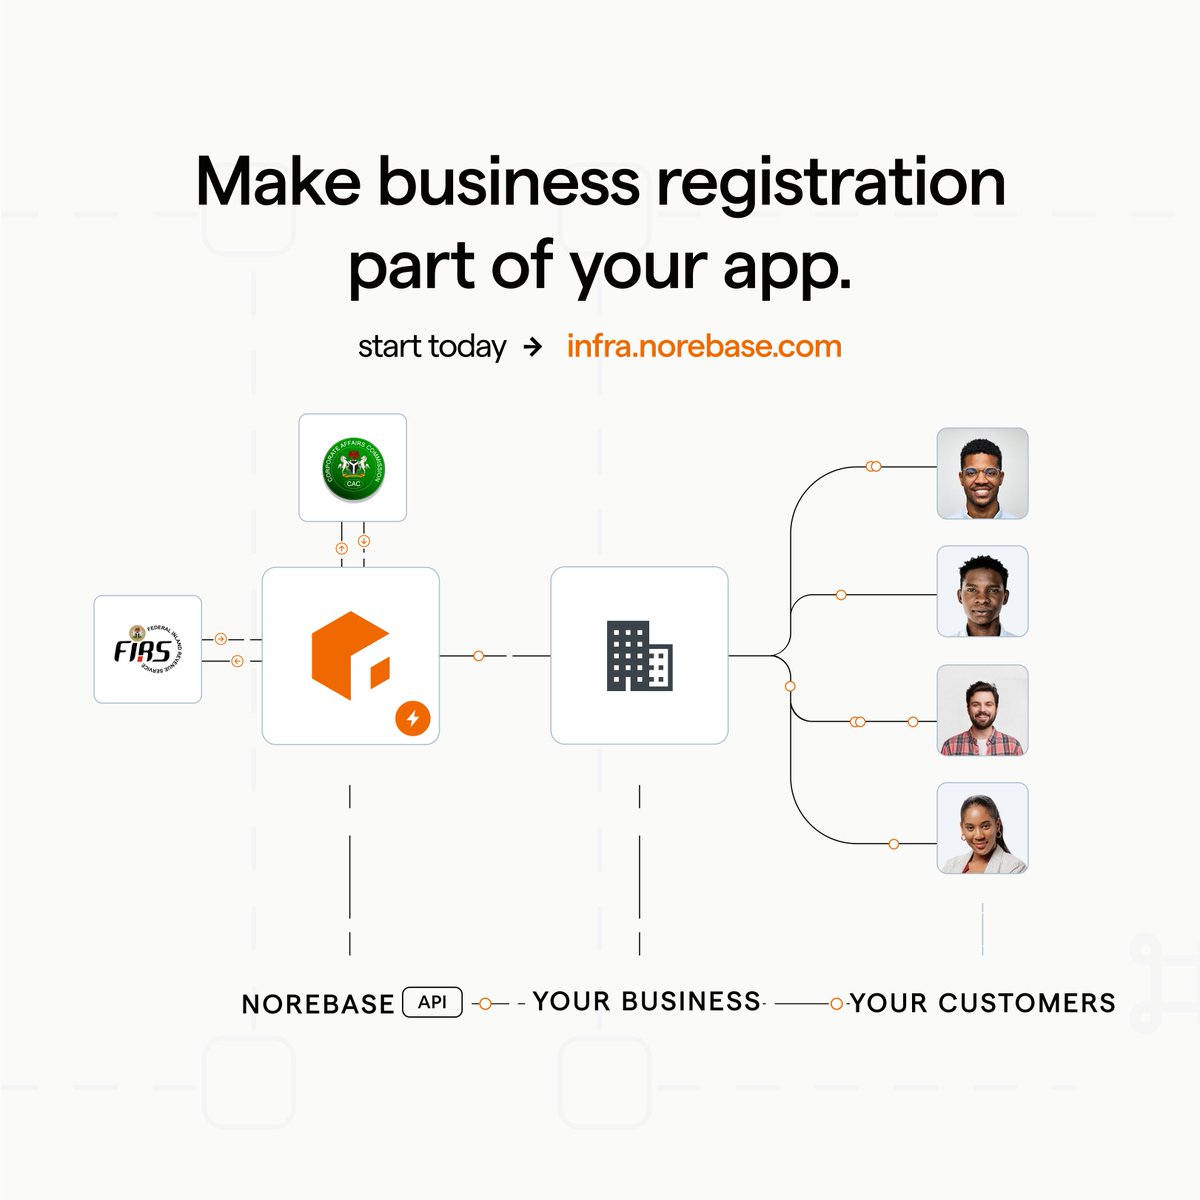 POS Operator Platform or FinTech with unregistered Merchants, Norebase has the solution you need.

With our API, your agents can register their businesses with CAC and get the documents within 3-5 business days.

It's the easiest way to stay compliant!

Send a DM to get started!